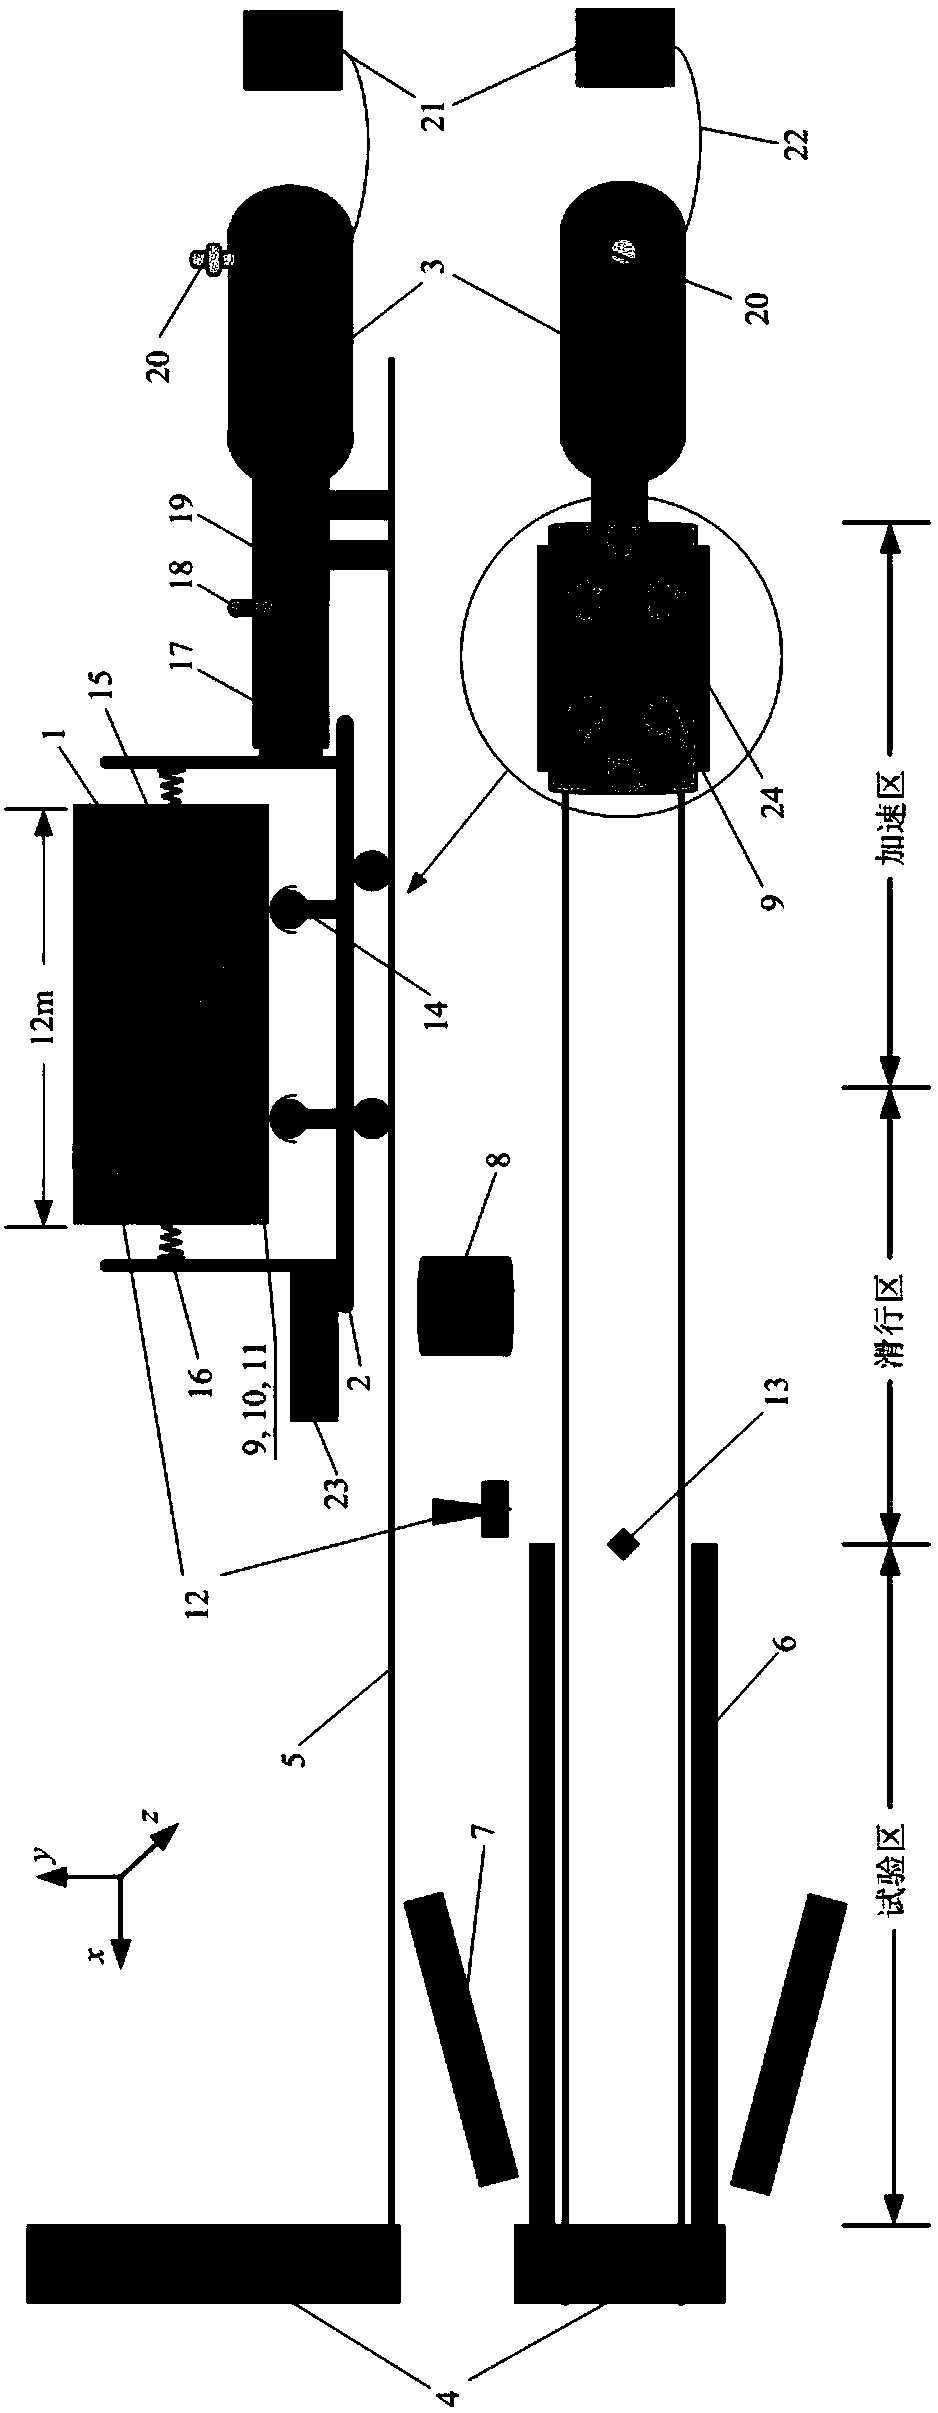 Train passenger secondary collision test system and method